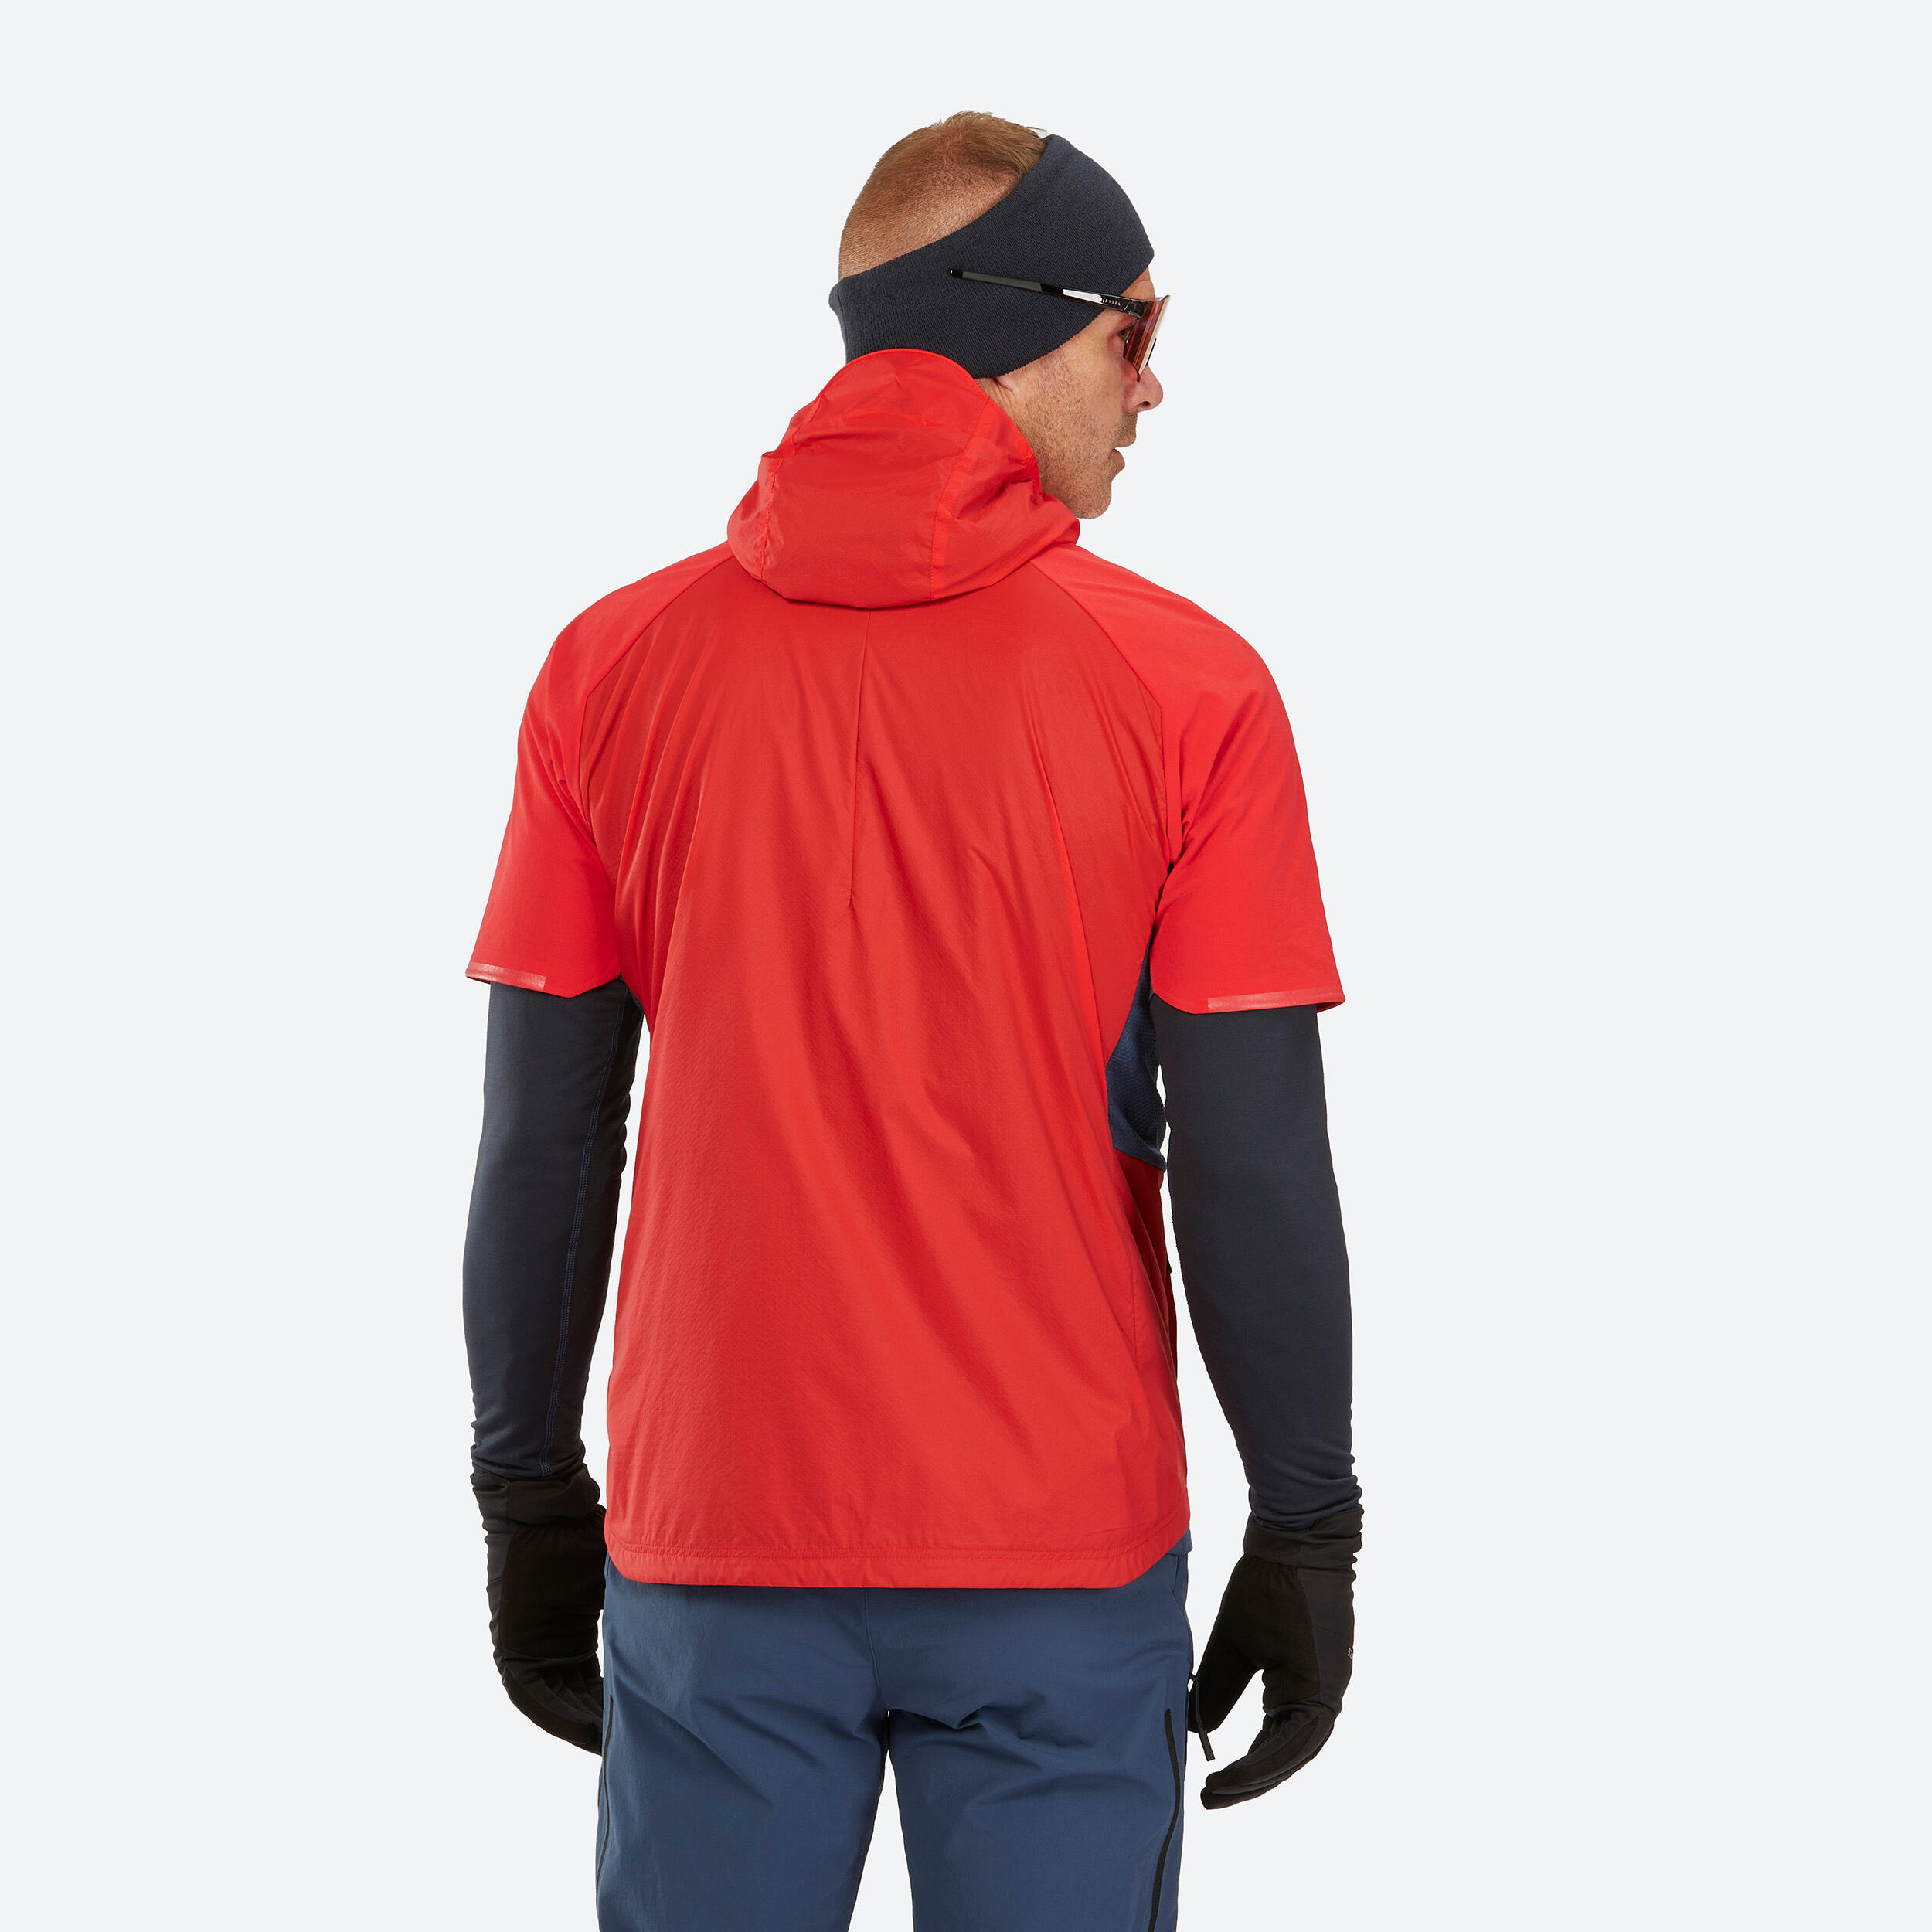 MEN'S PACER SHORT-SLEEVED CROSS COUNTRY SKI JACKET - RED AND NAVY BLUE 5/14